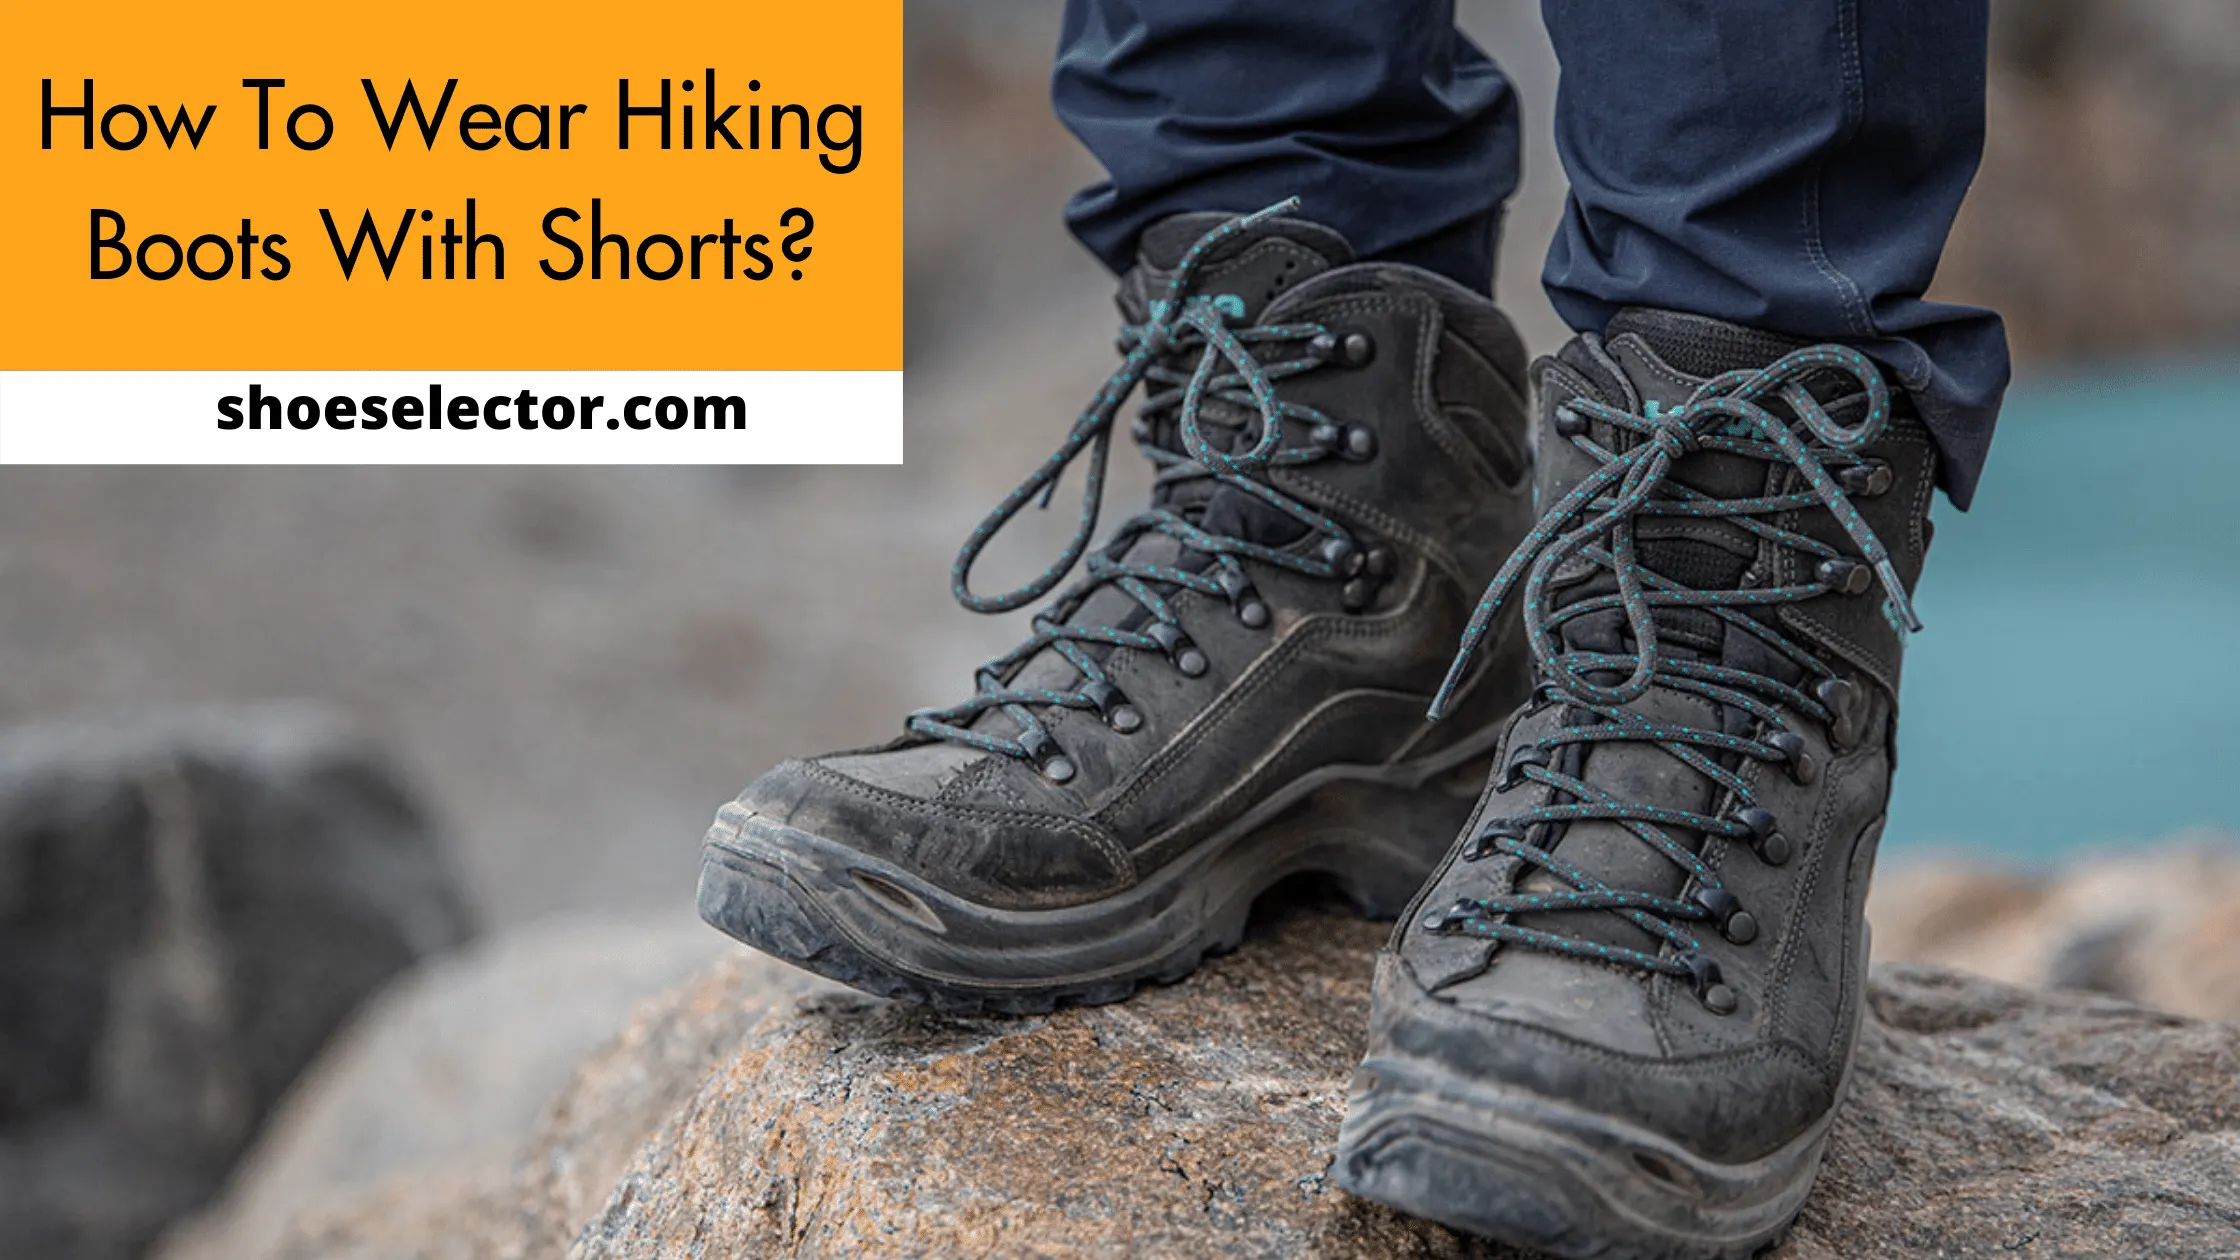 How To Wear Hiking Boots With Shorts? - Complete Guide